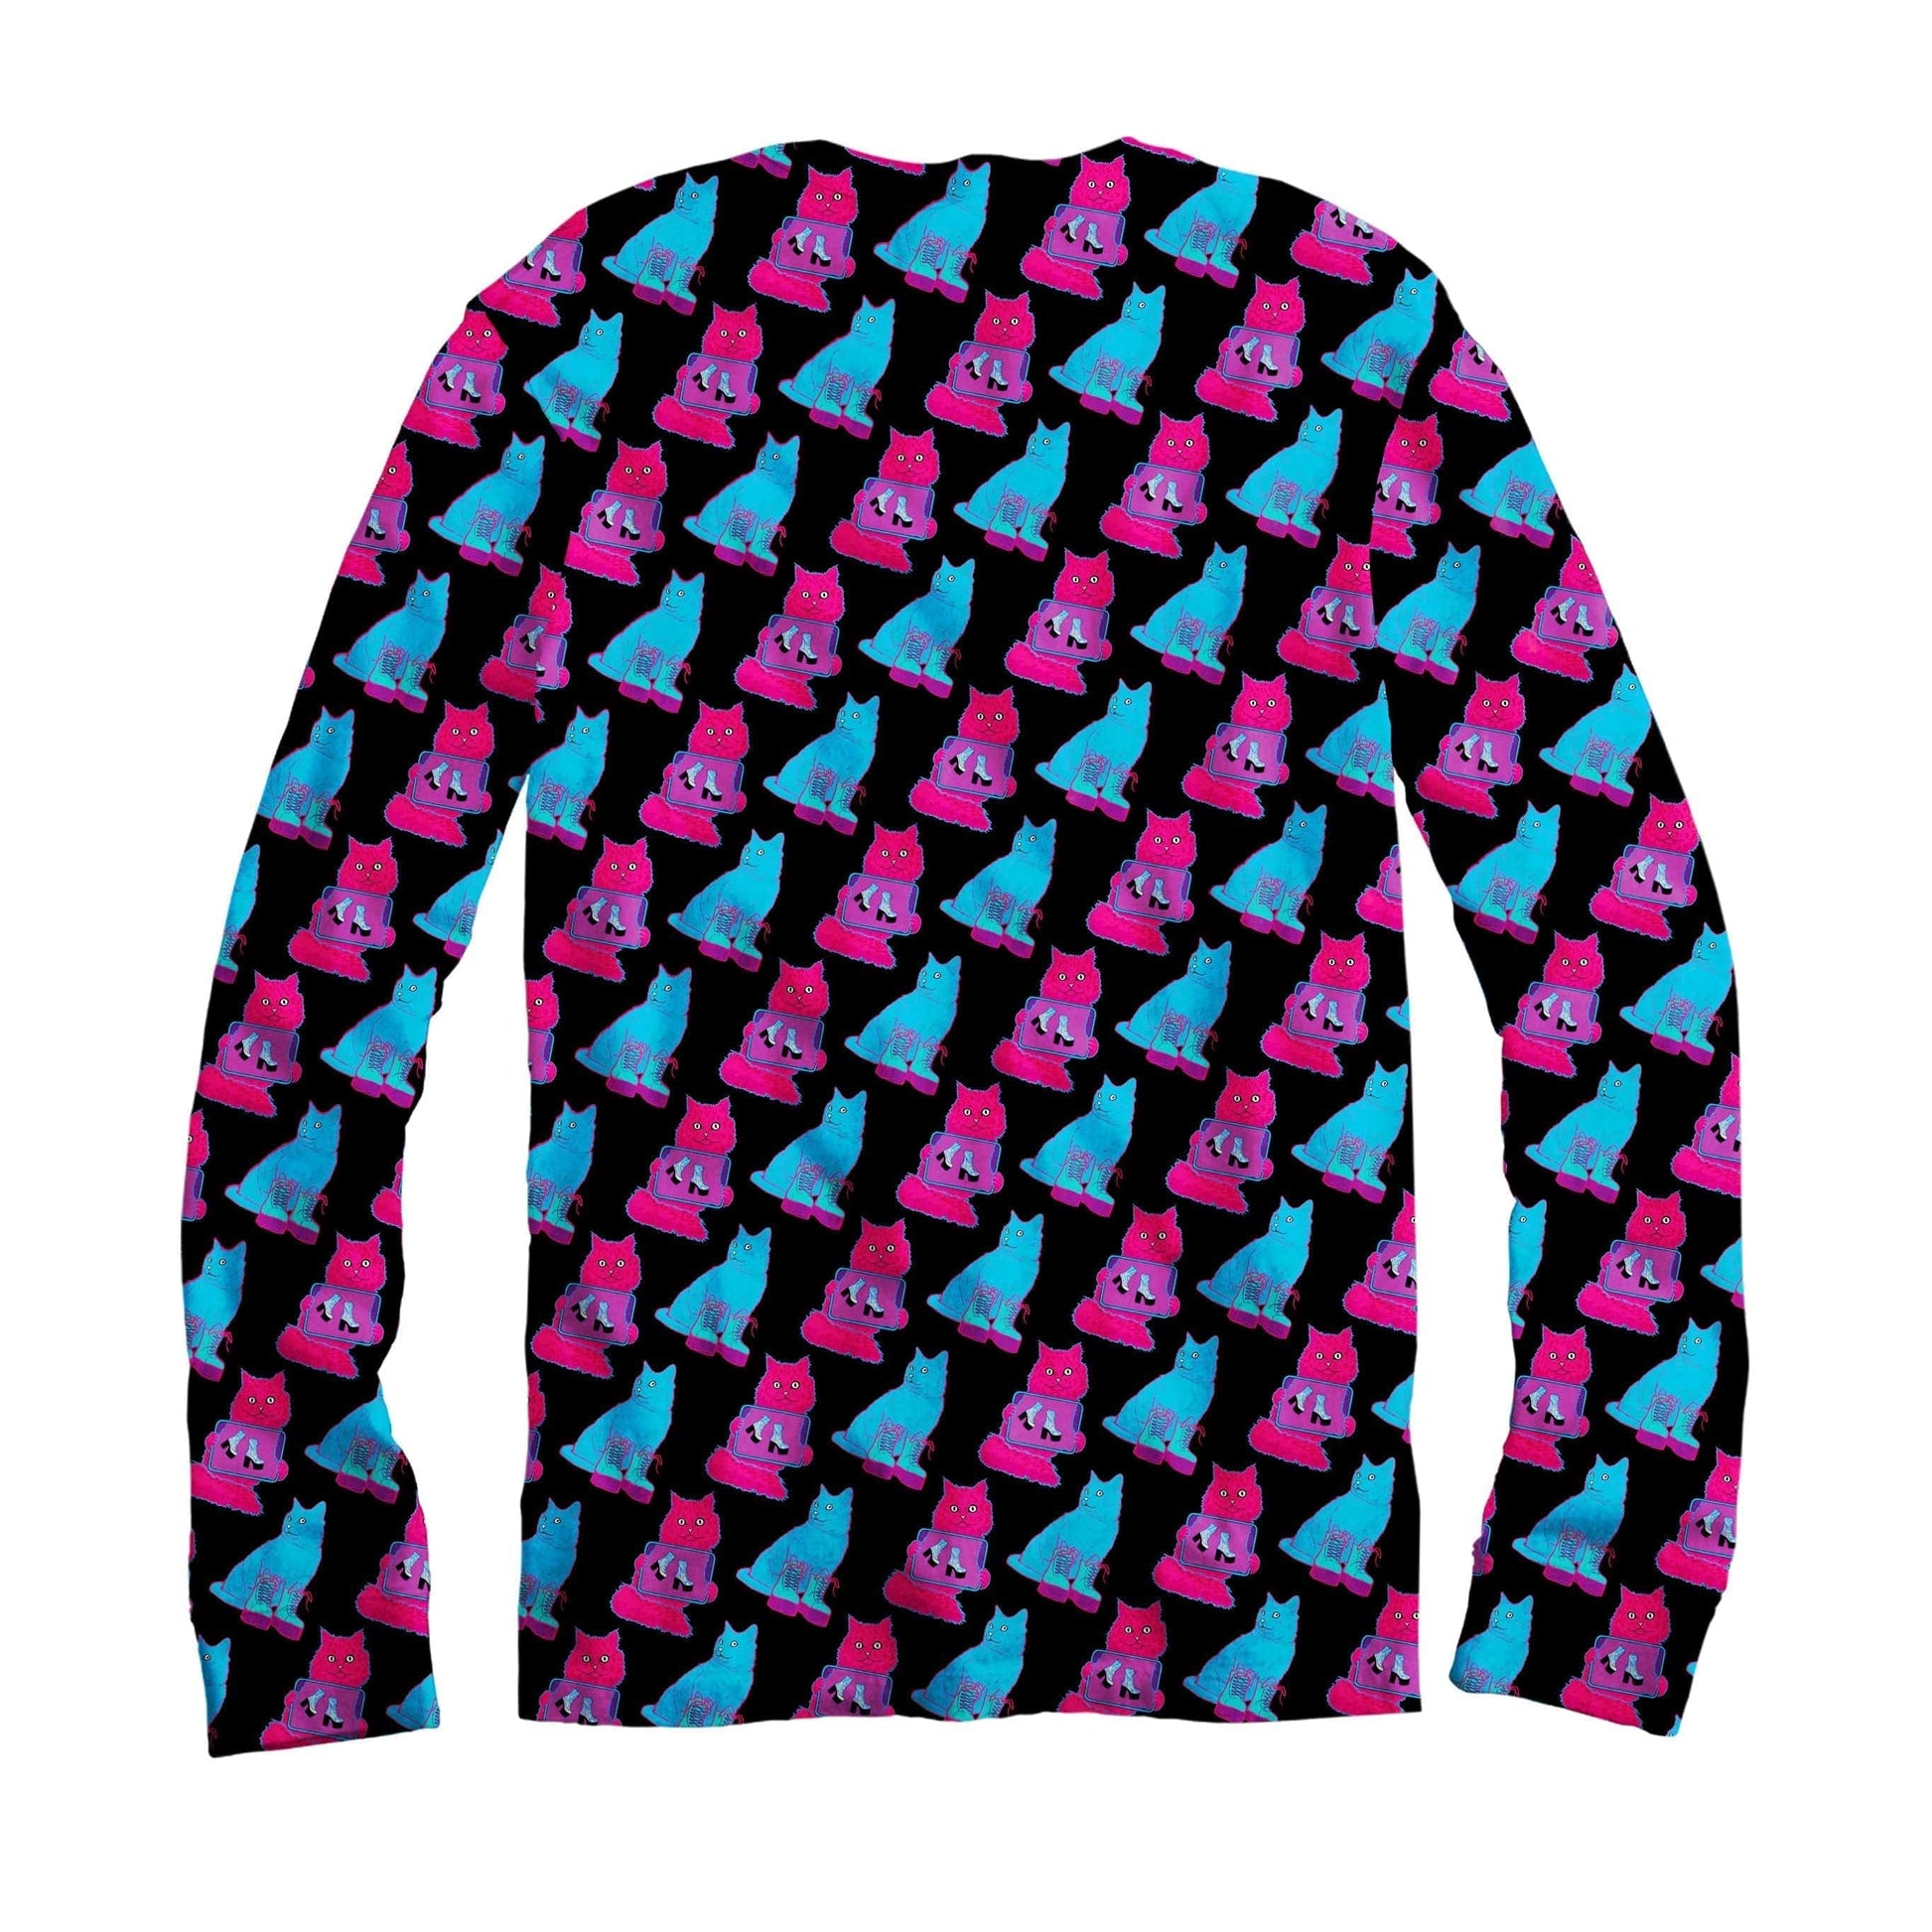 Boots N Cats Long Sleeve, Noctum X Truth, | iEDM